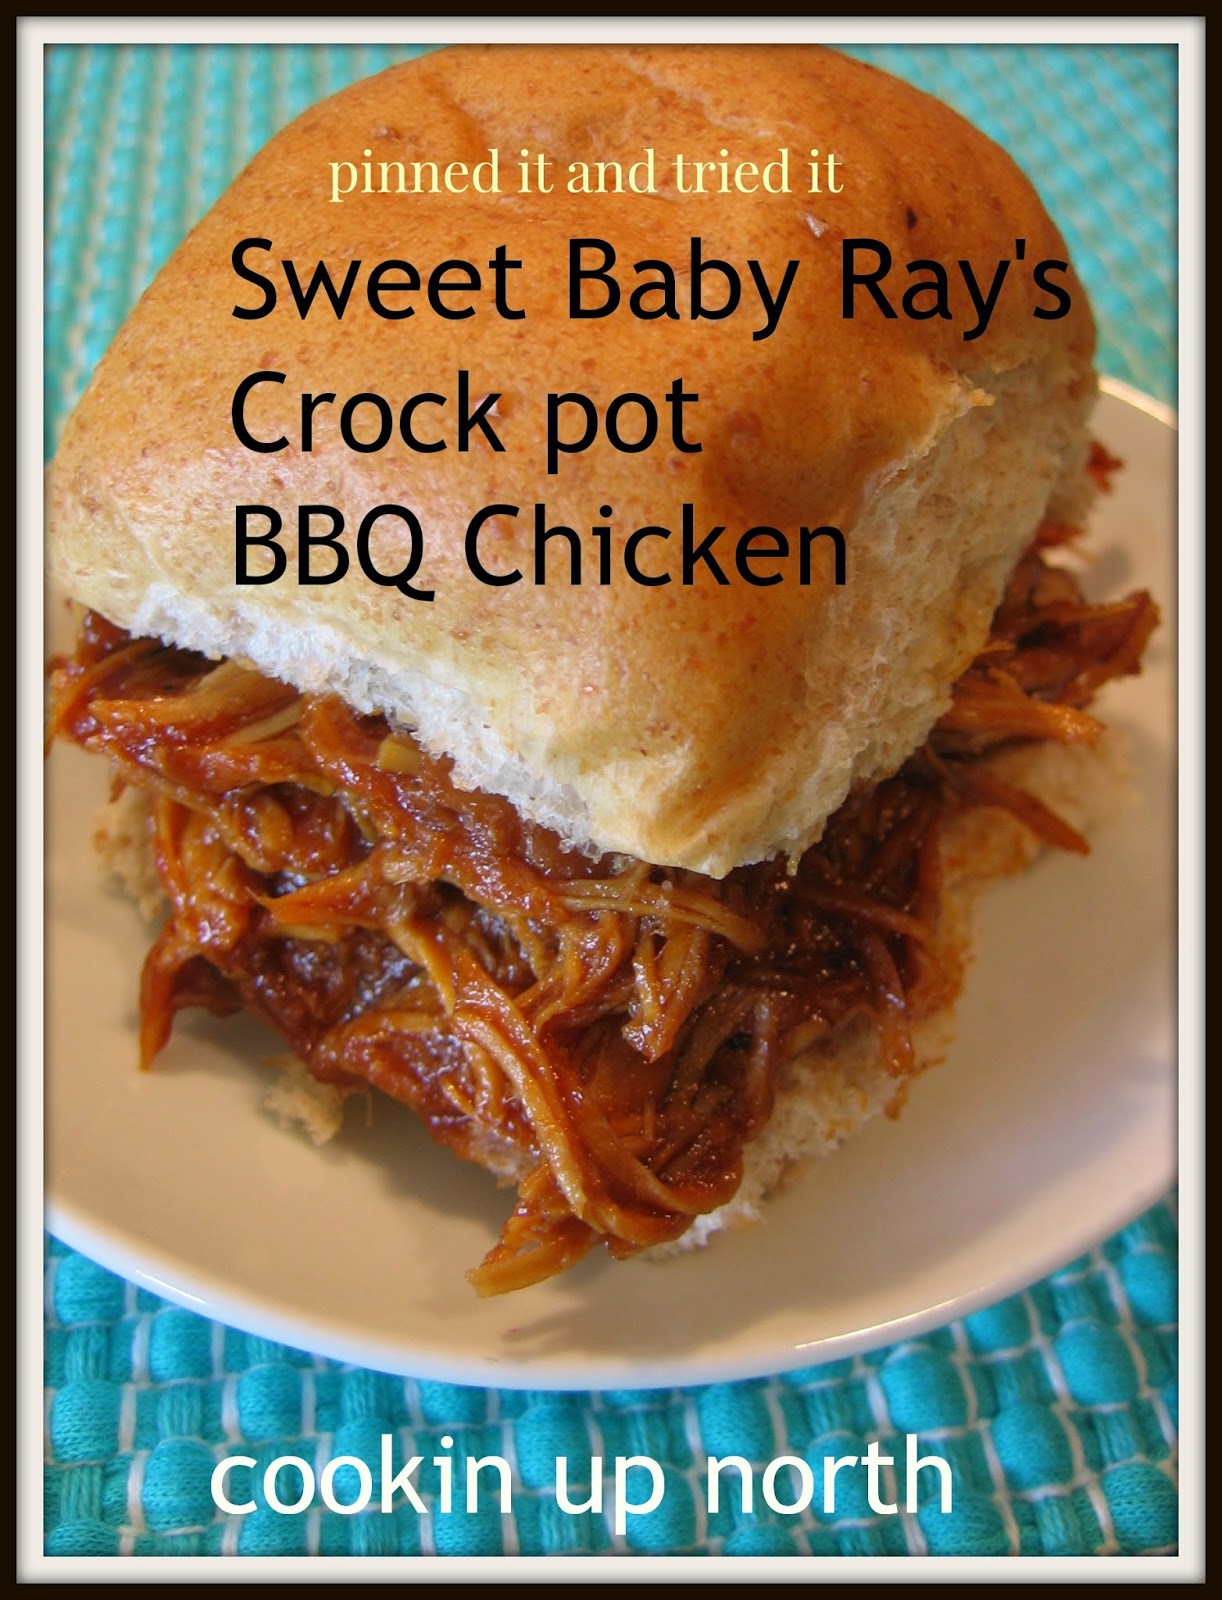 cookin' up north: Sweet Baby Ray's Crock pot Chicken..pinned it and tried it